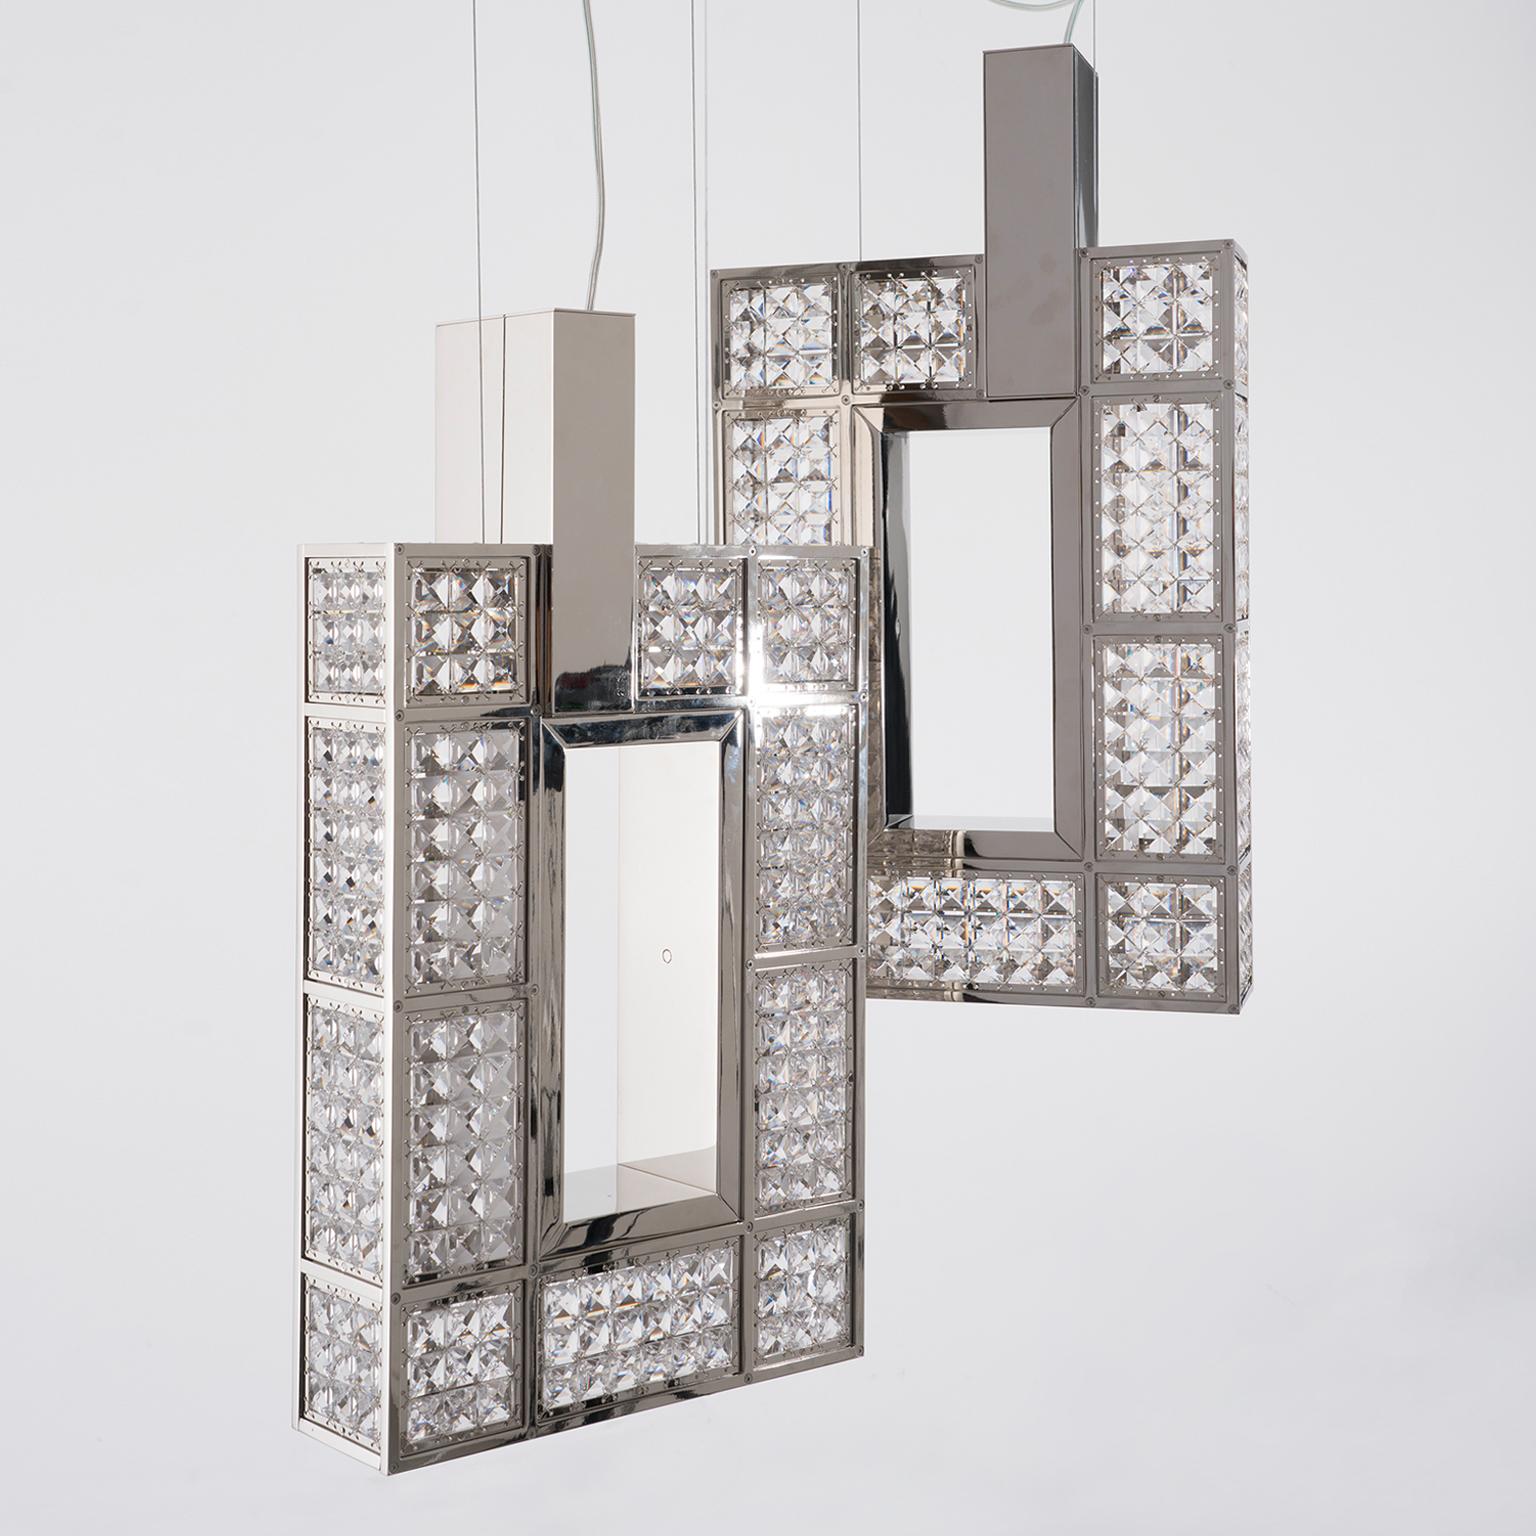 A sophisticated bright jewel, an unusual and unique interpretation of a chandelier.
Simple lines and squared geometries covered by a crystal net. The result is a truly glittering piece.